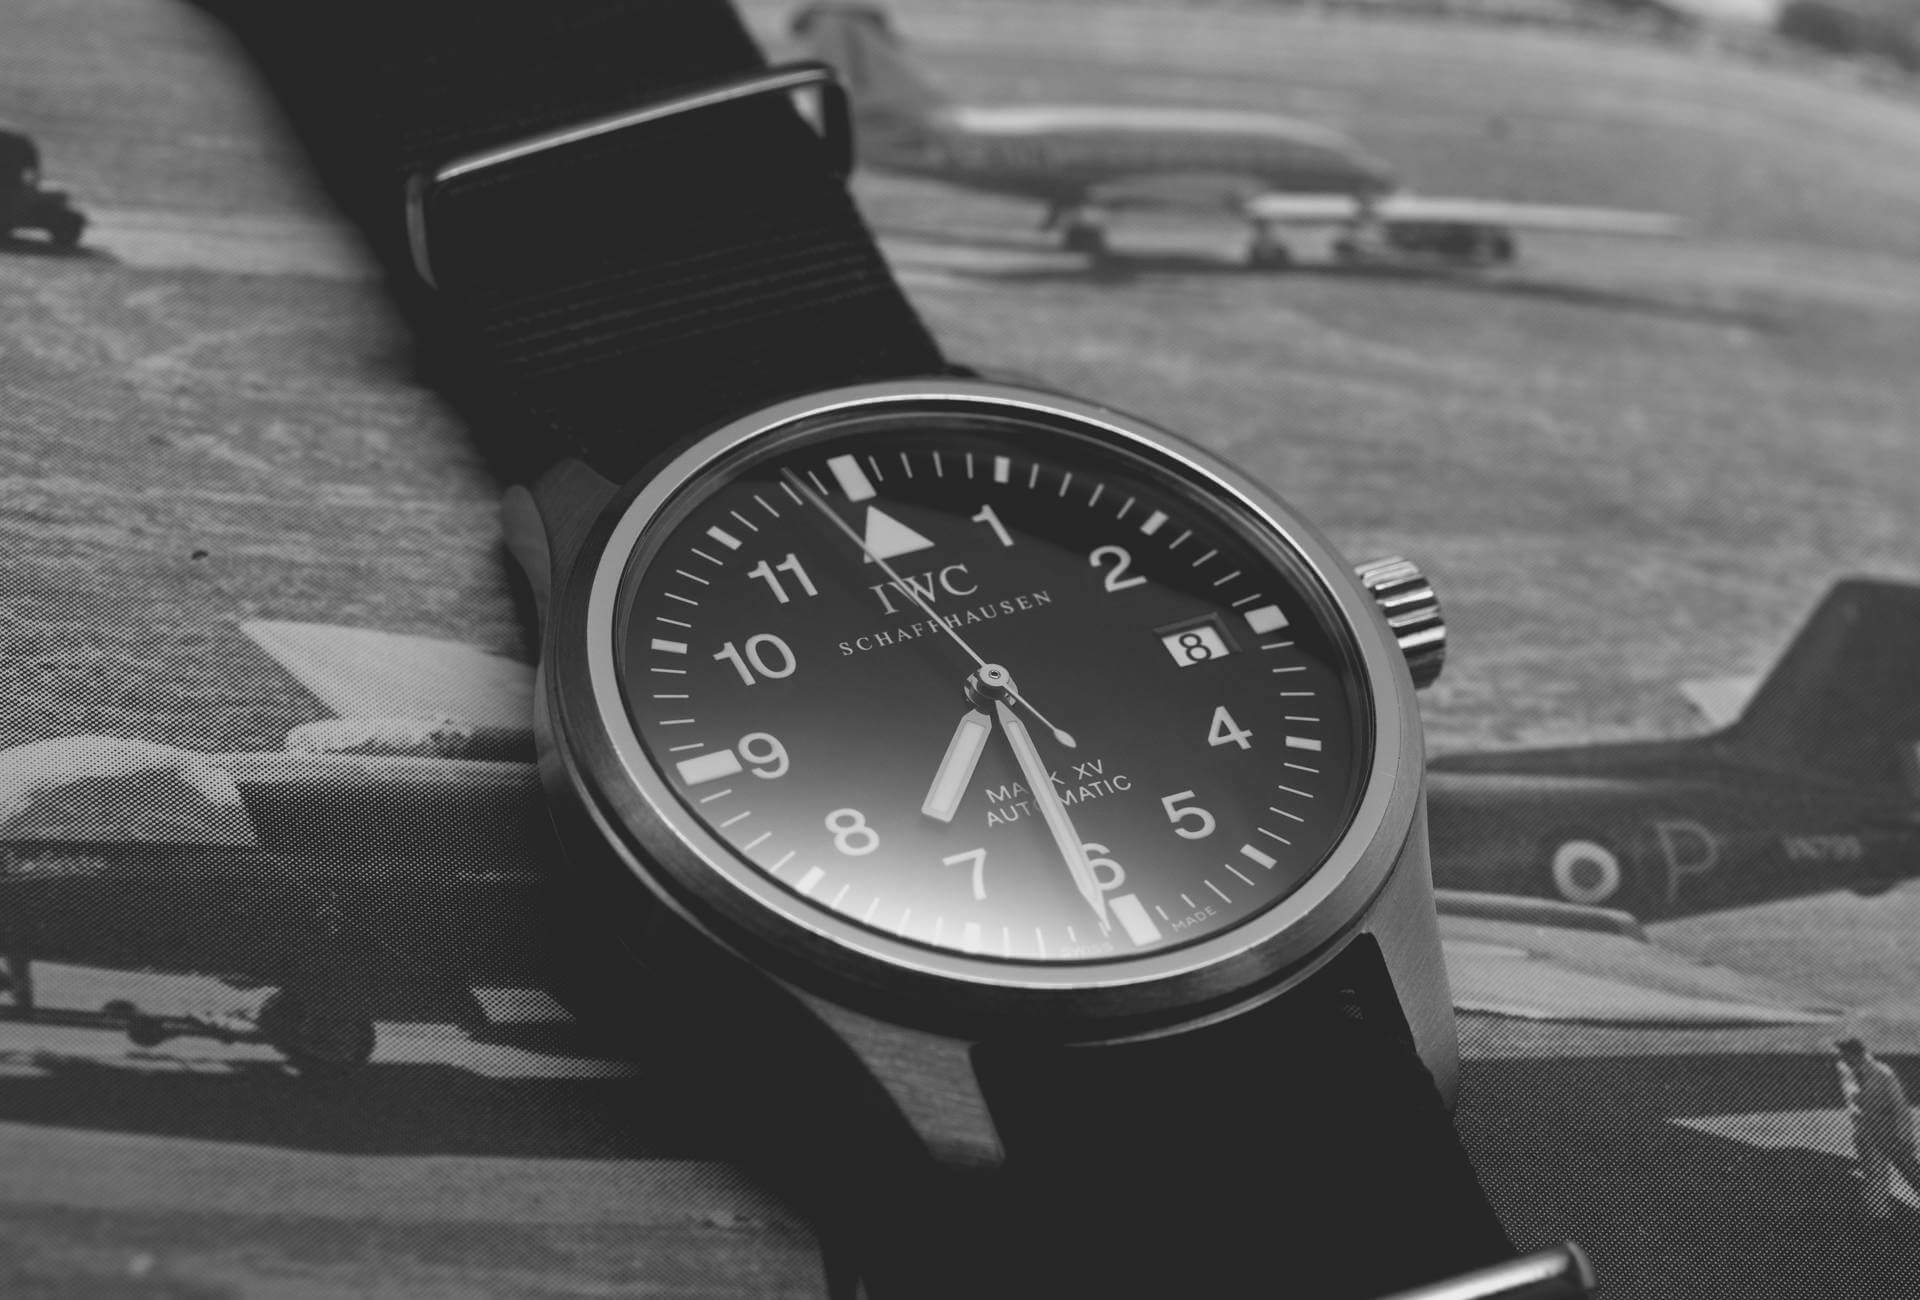 The IWC Mark series, the ultimate 